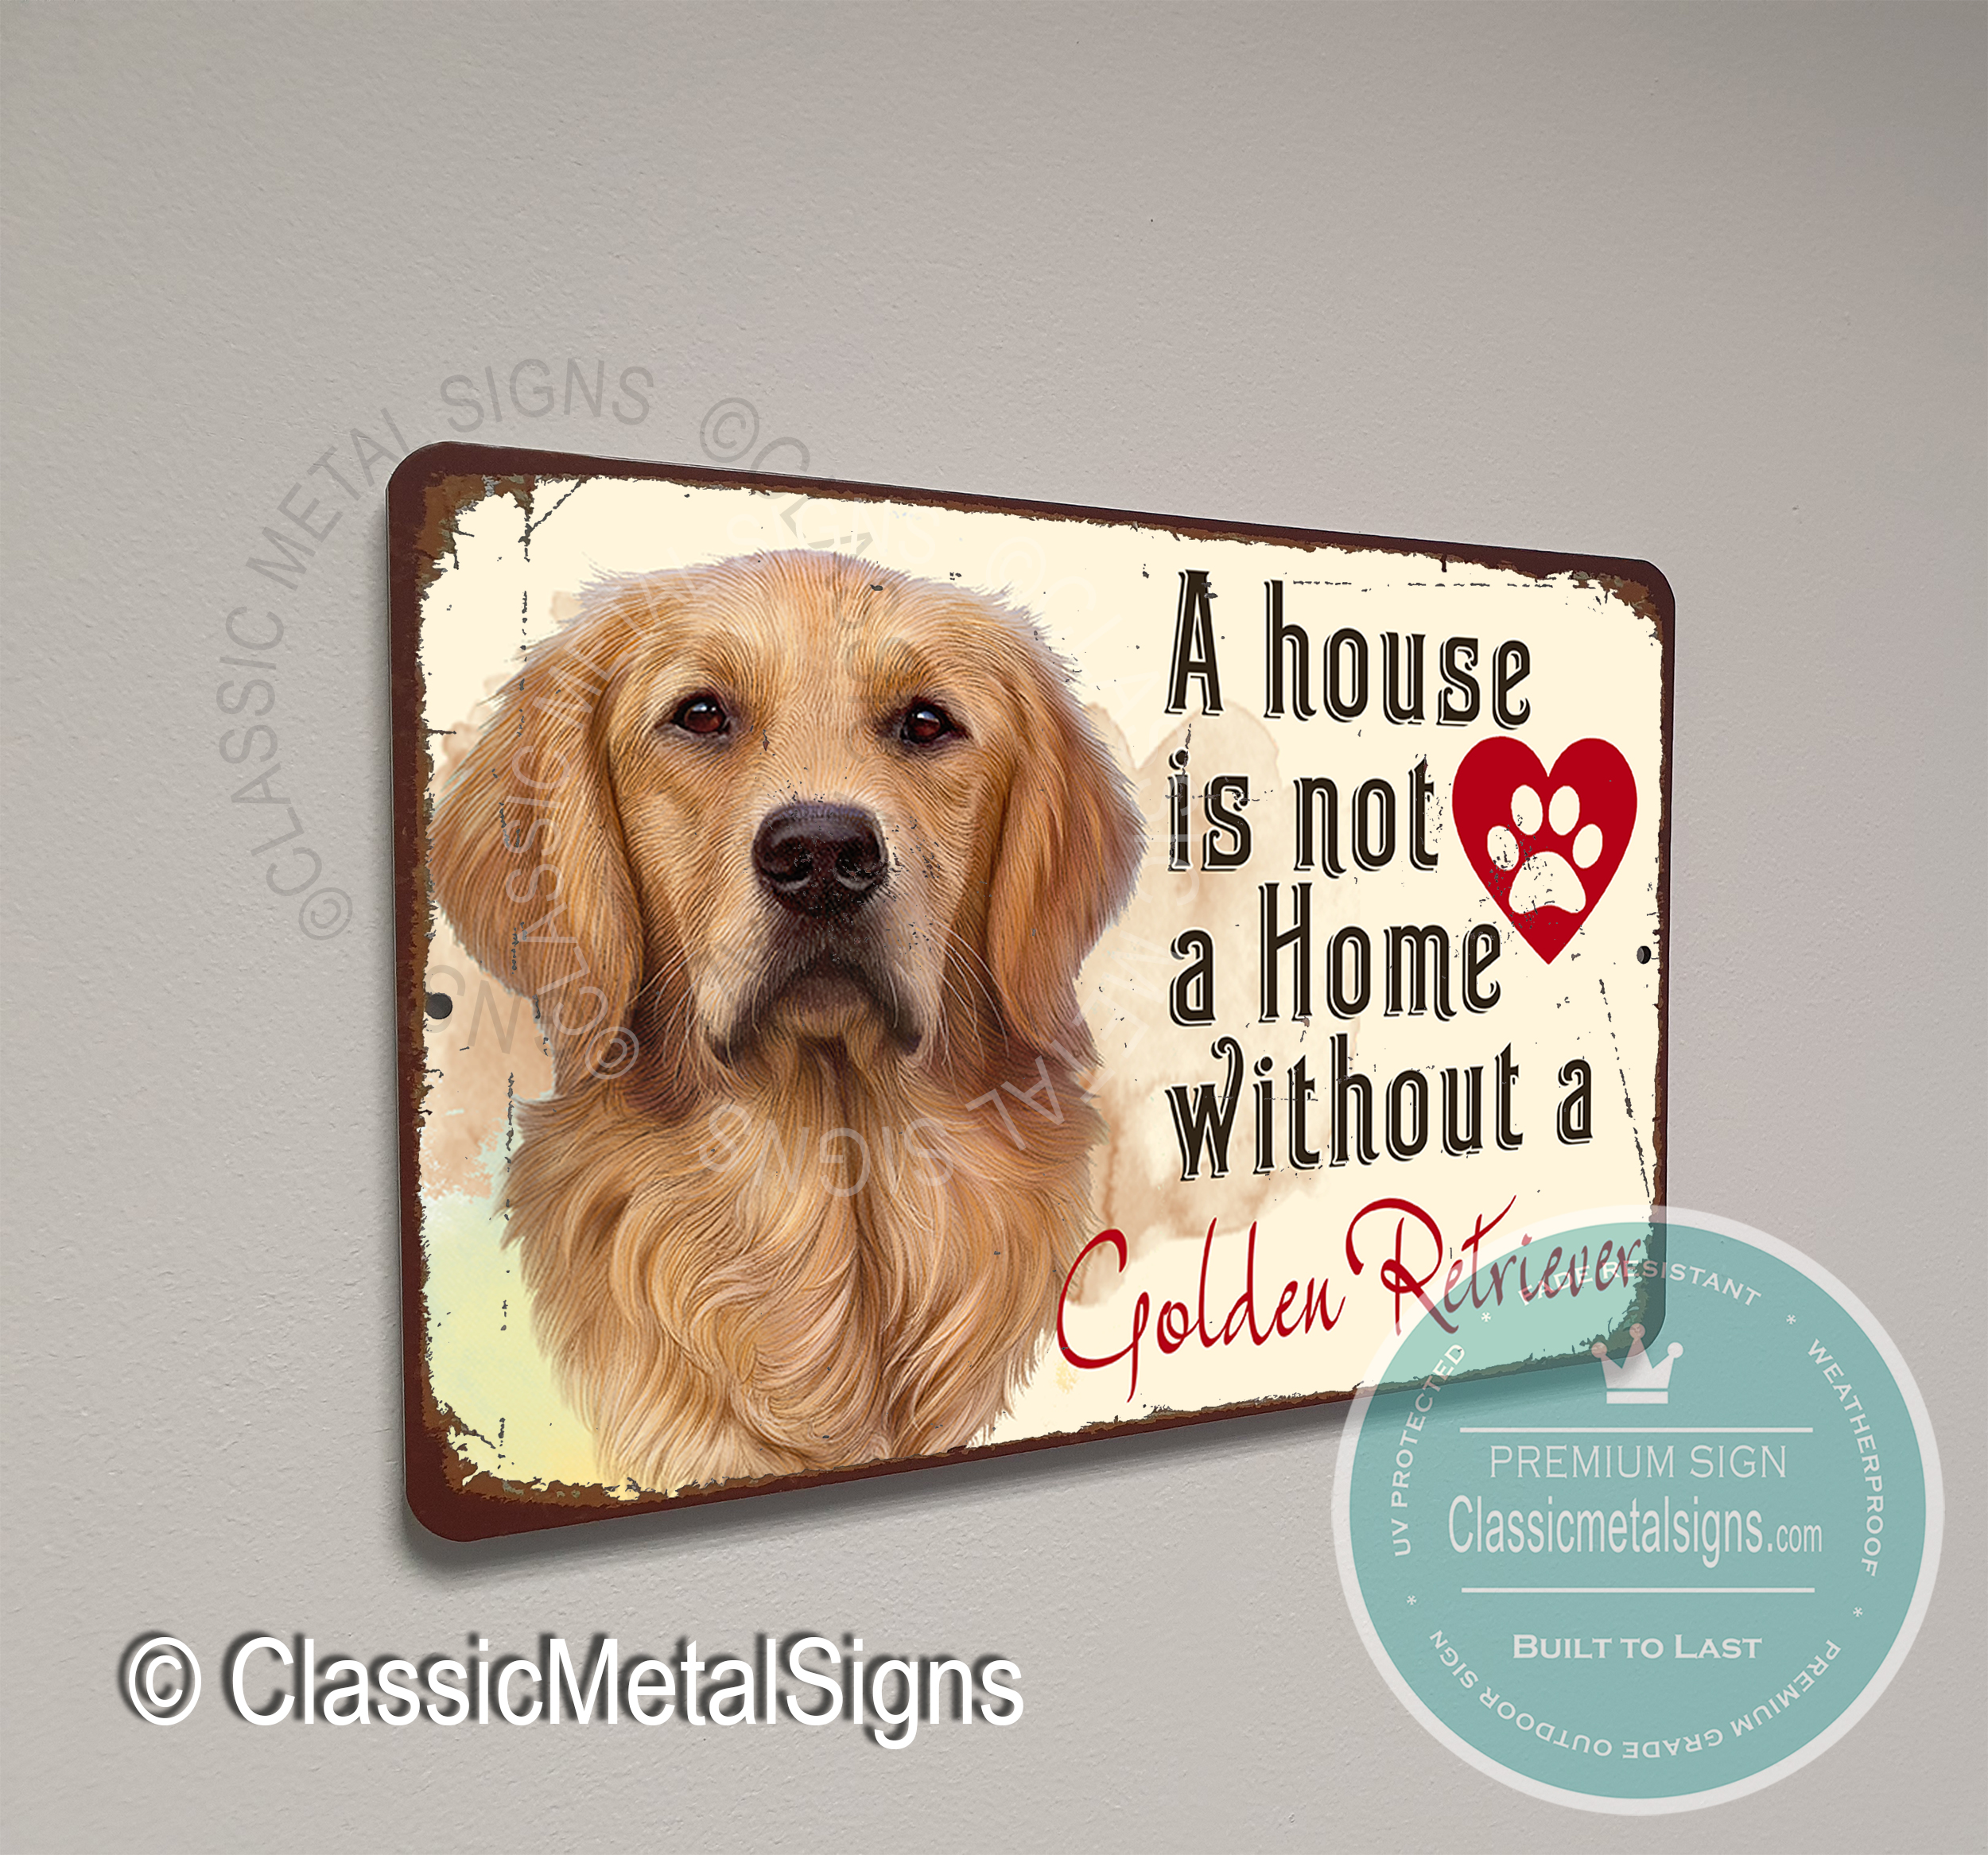 A House is not a home without a Golden Retriever Signs